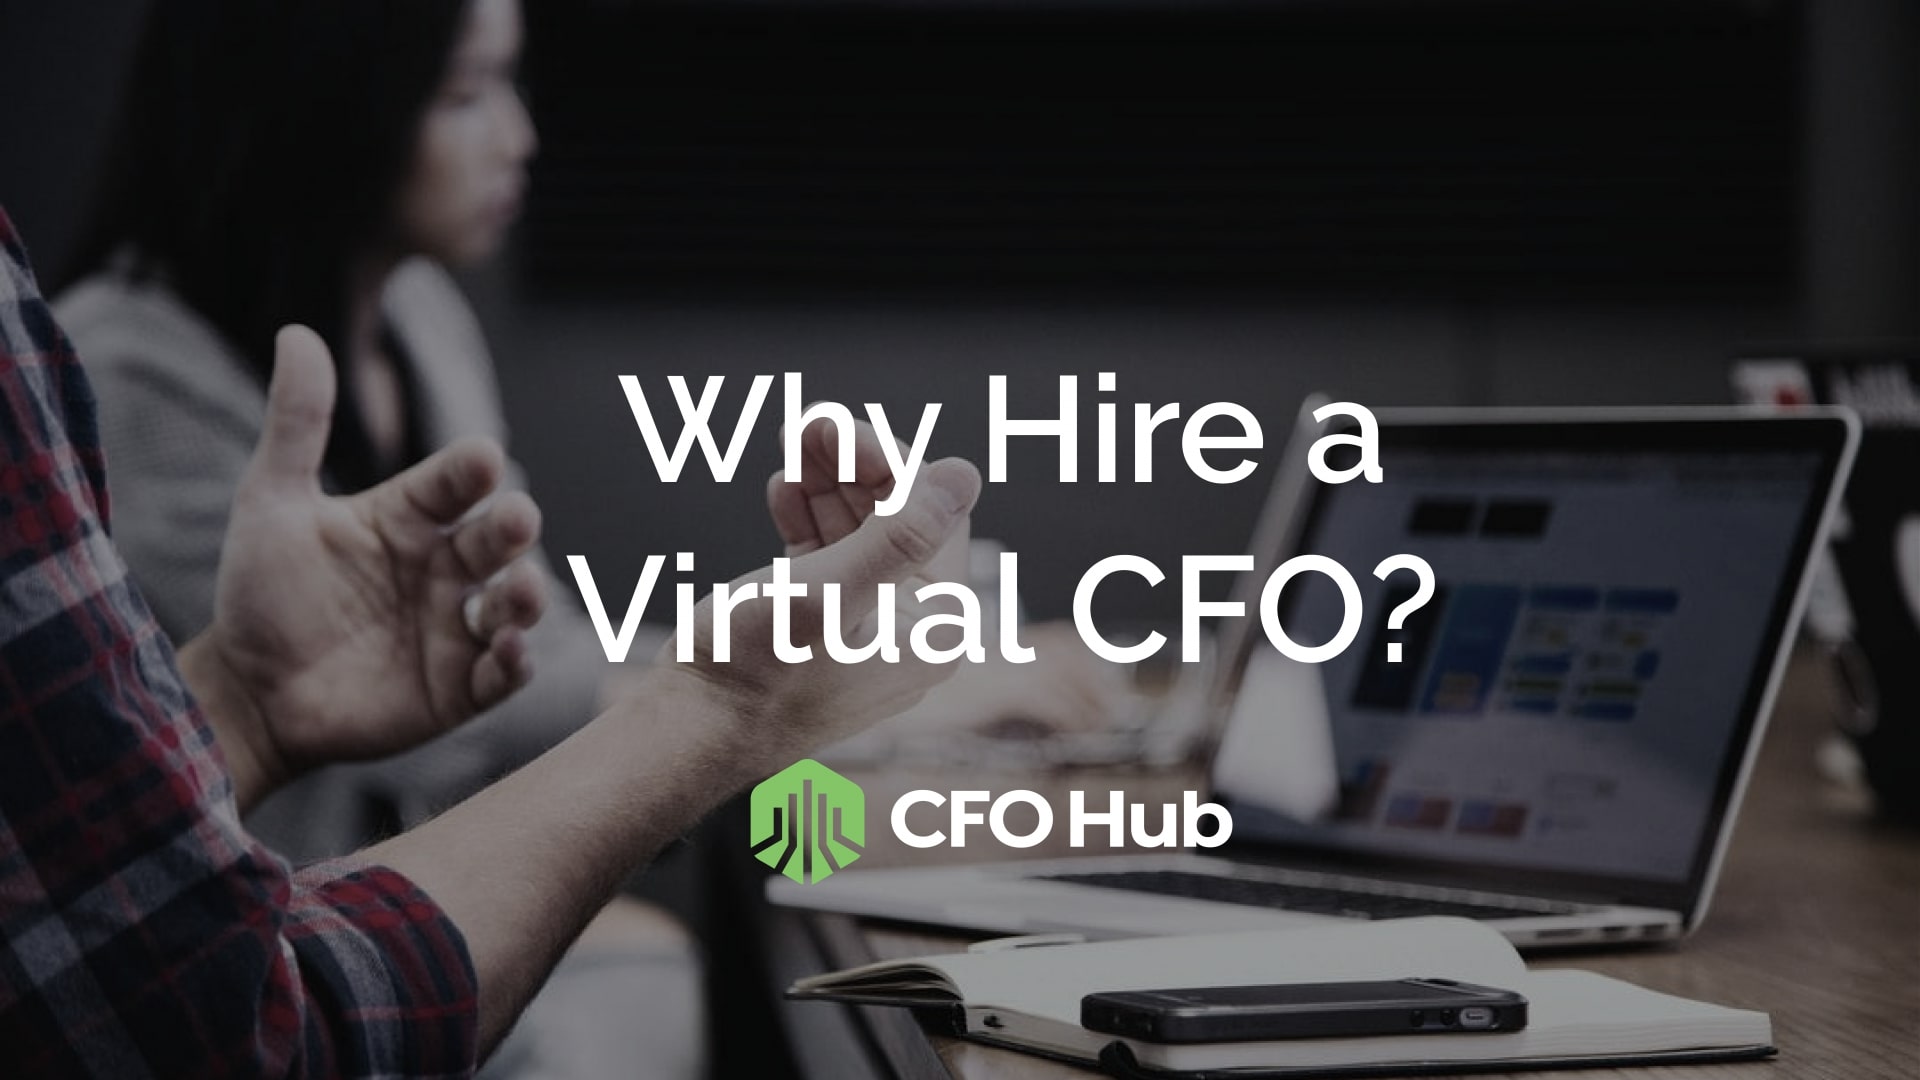 A presentation is underway in a conference room, highlighting the text "Why Hire a Virtual CFO?" prominently on the screen. Beneath the text, the "CFO Hub" logo is visible. Attendees are seated at a table with laptops and devices, poised to learn about the benefits of hiring a Virtual CFO.